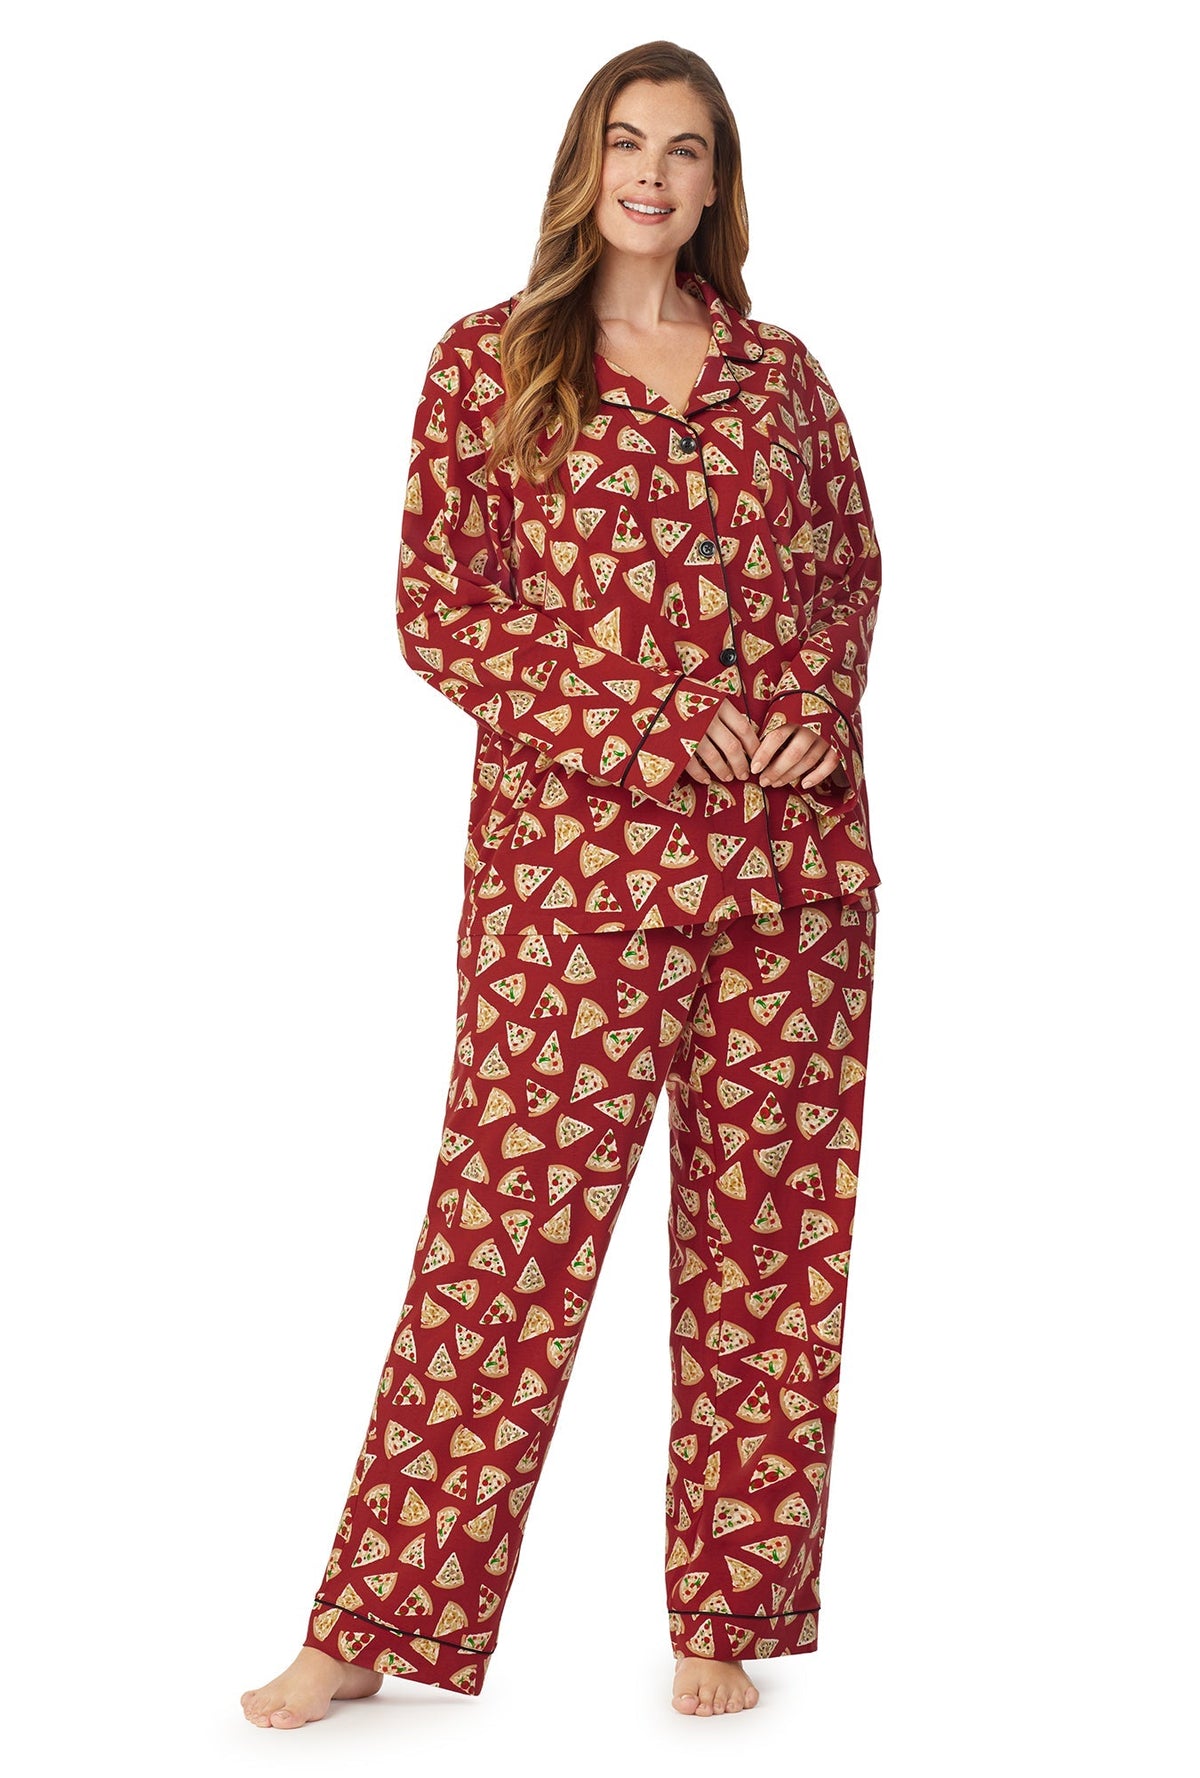 A lady wearing a brown long sleeve plus size pj set with pizza pattern.